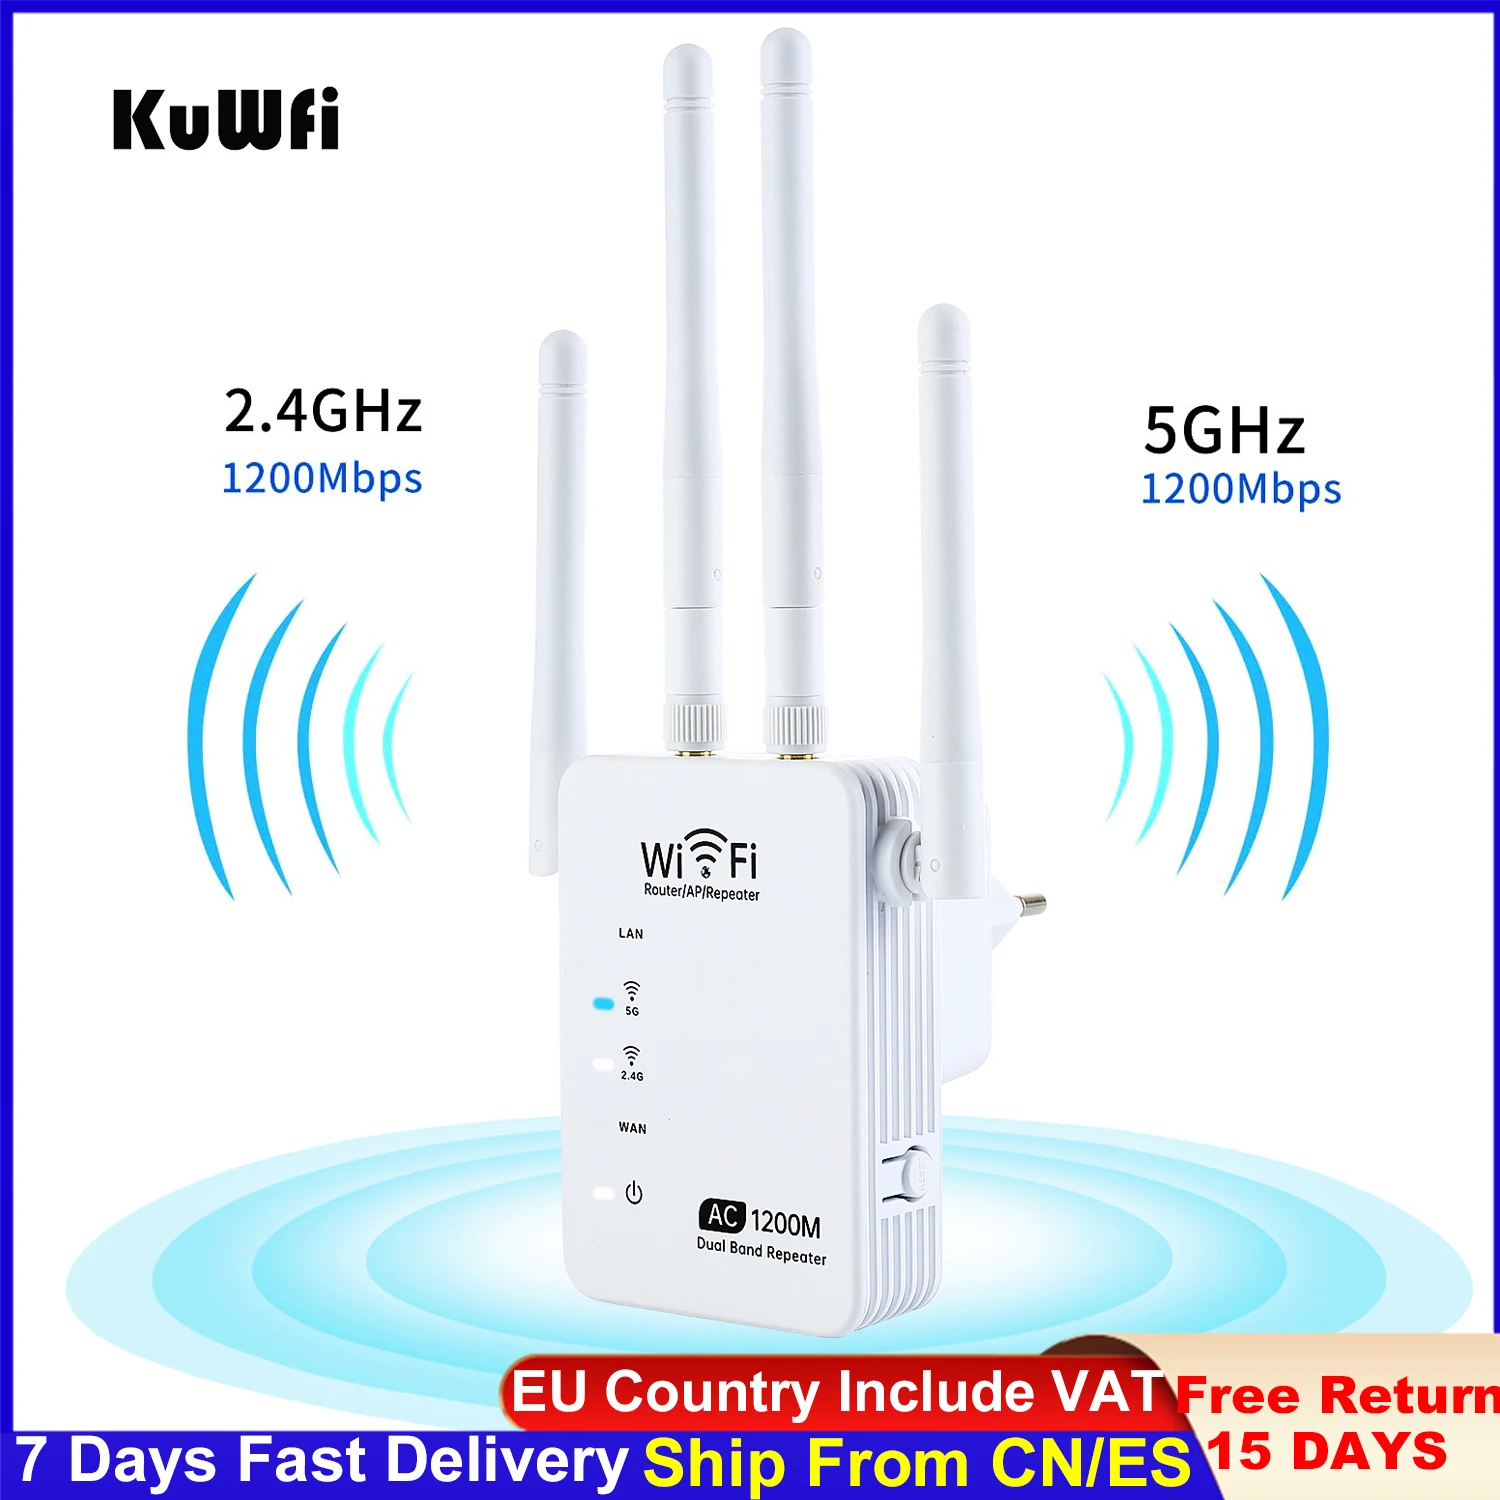 WiFi Router Wireless Internet Signal Booster Supports Repeater/Router/AP Mode 2.4/5GHz Dual Band Up to 1200 Mbps Compact Design 360 Degree Wi-fi Coverage 